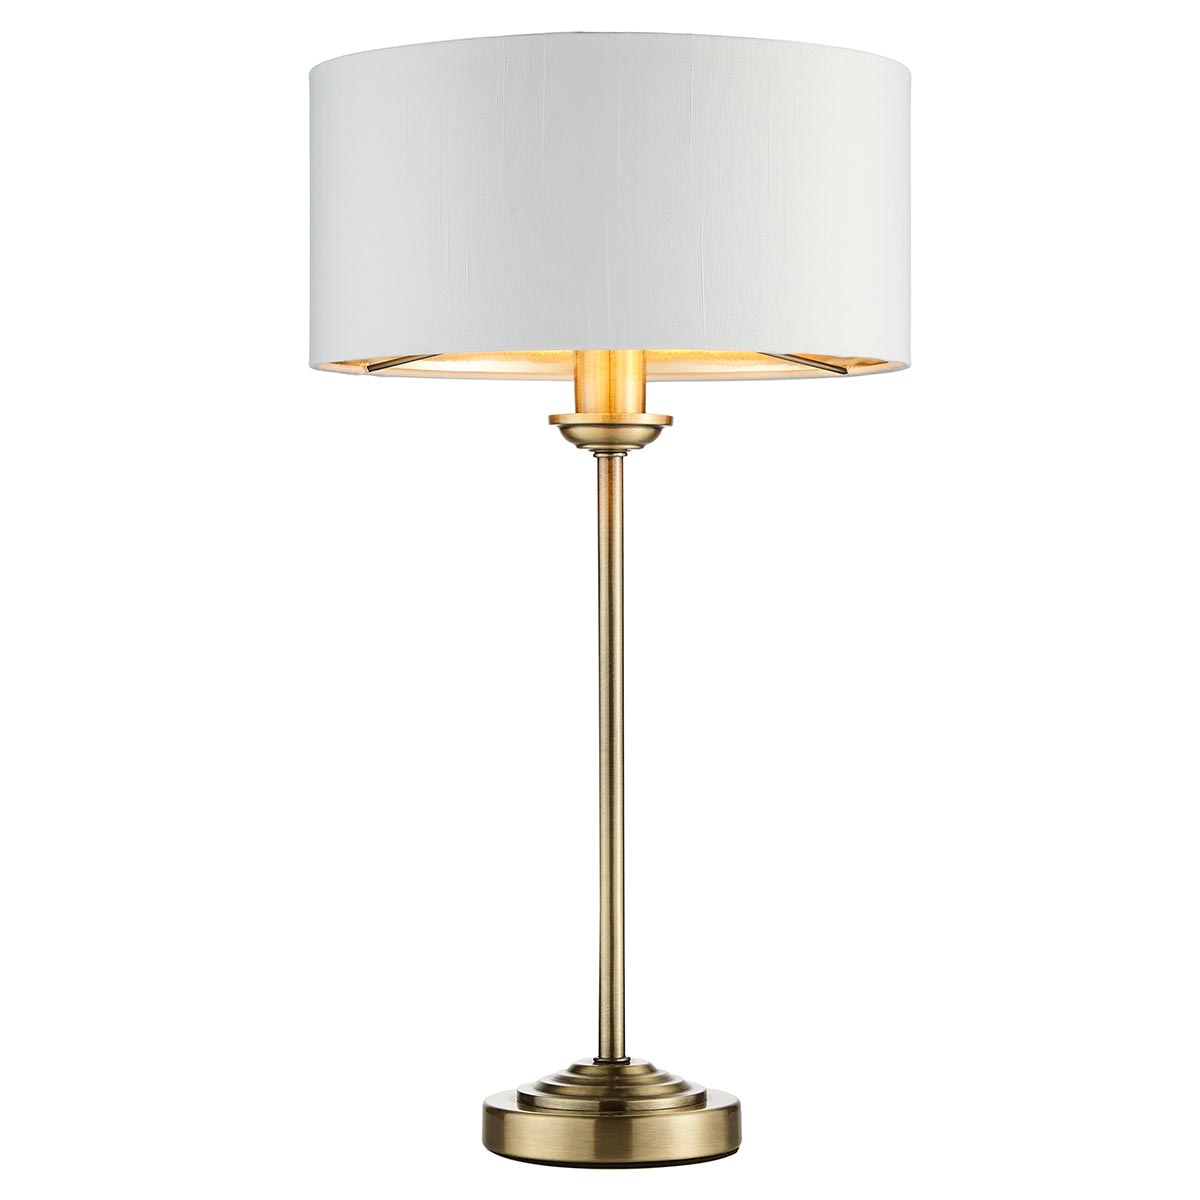 Highclere 1 Light Table Lamp Antique Brass White Shade